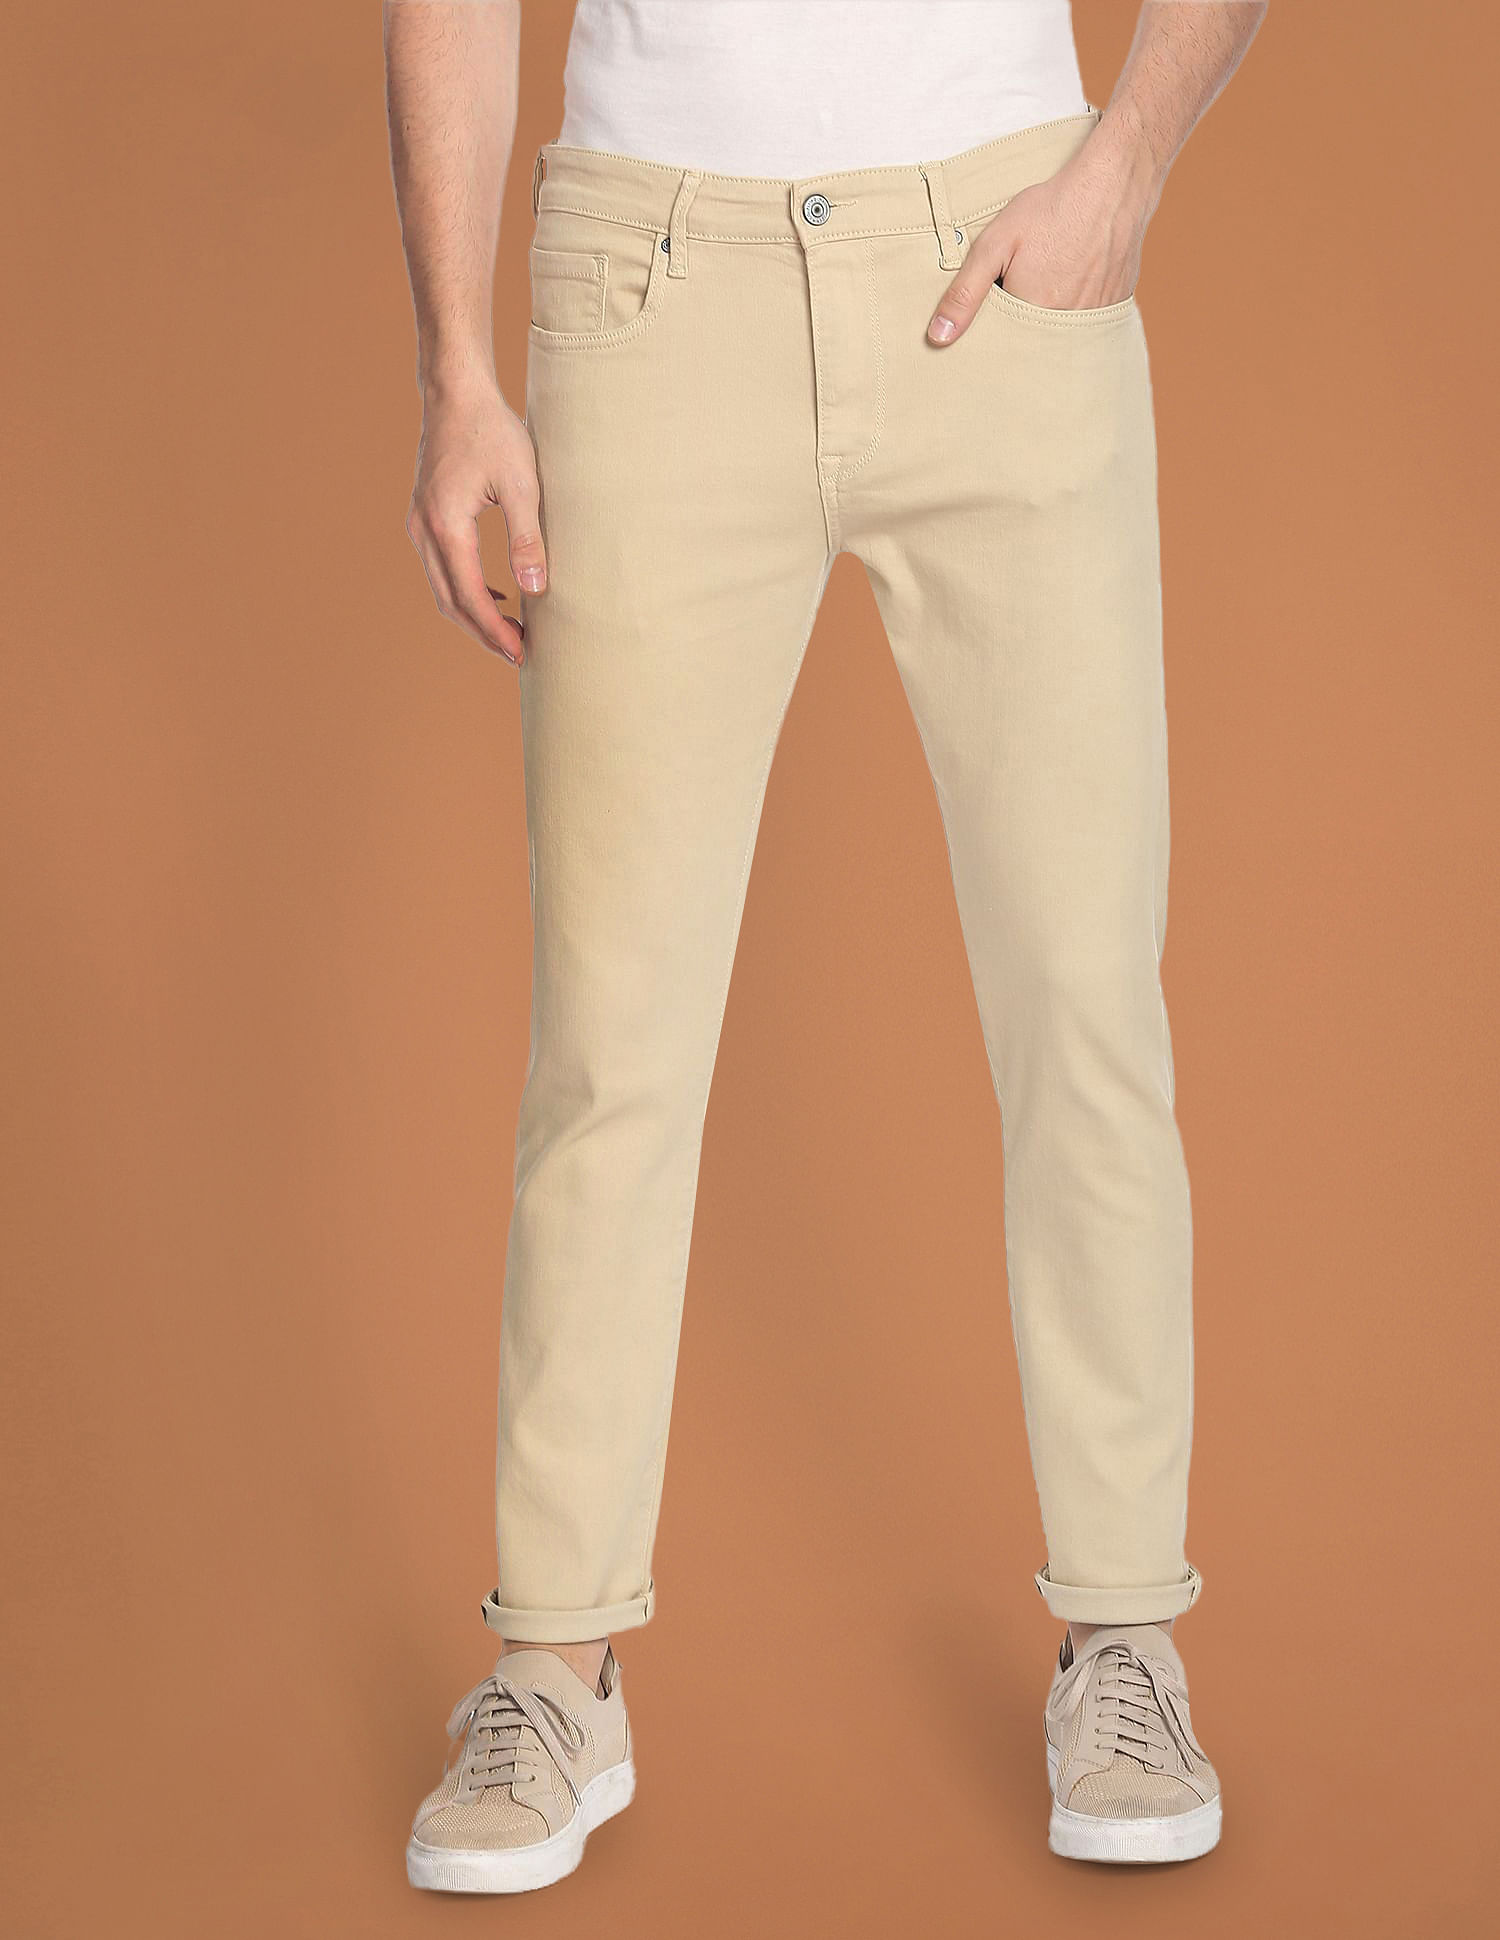 IVY GREEN UTILITY PANT (SLIM TAPERED FIT) – ROOKIES